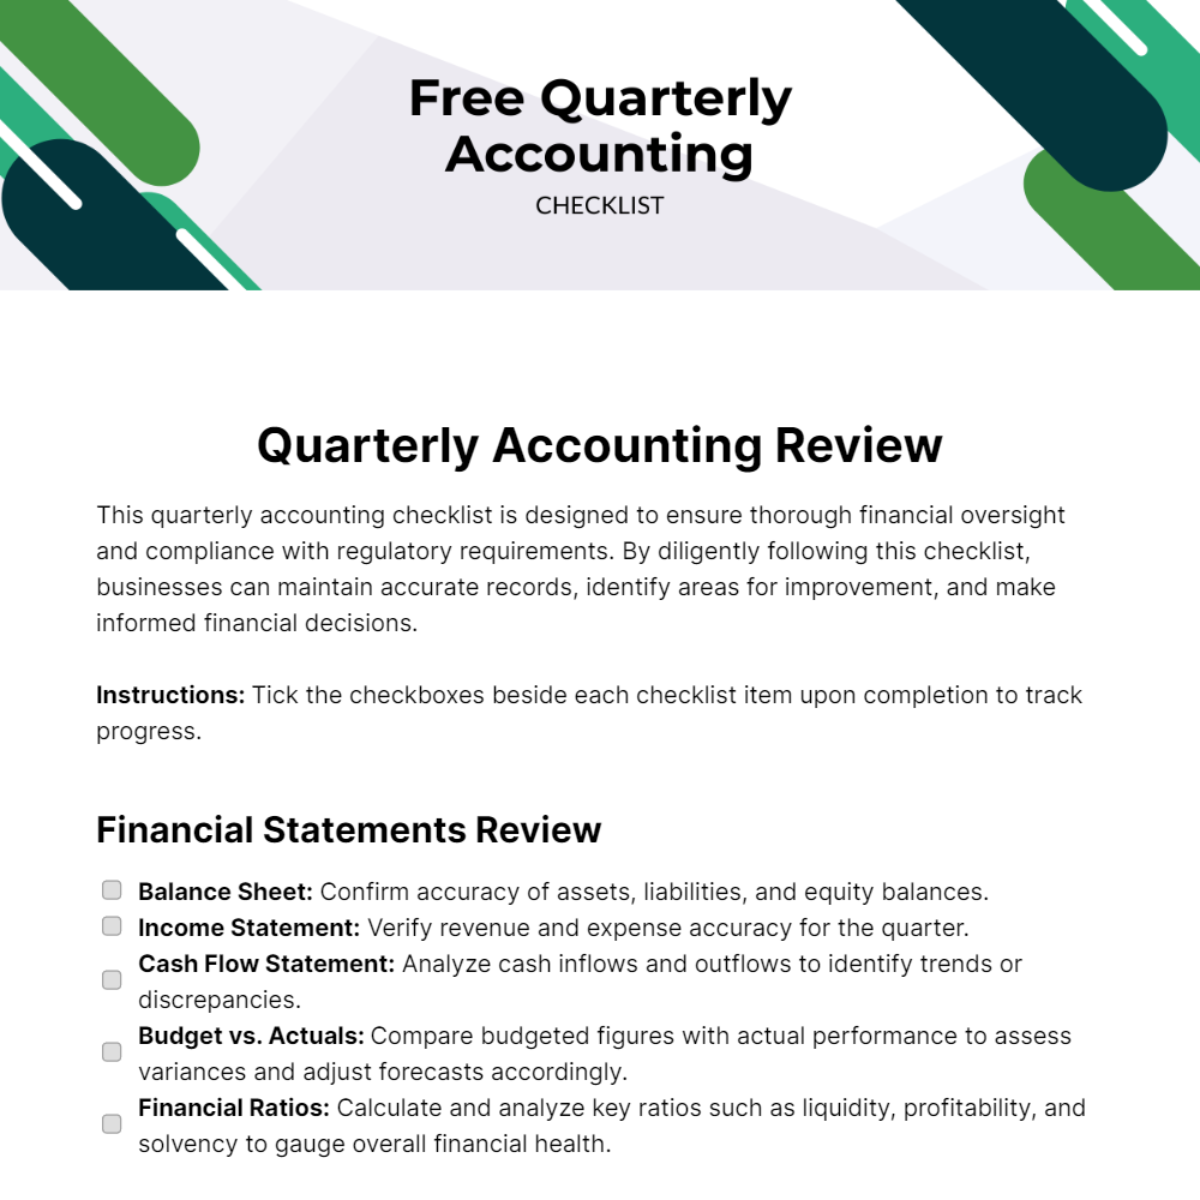 Free Quarterly Accounting Checklist Template